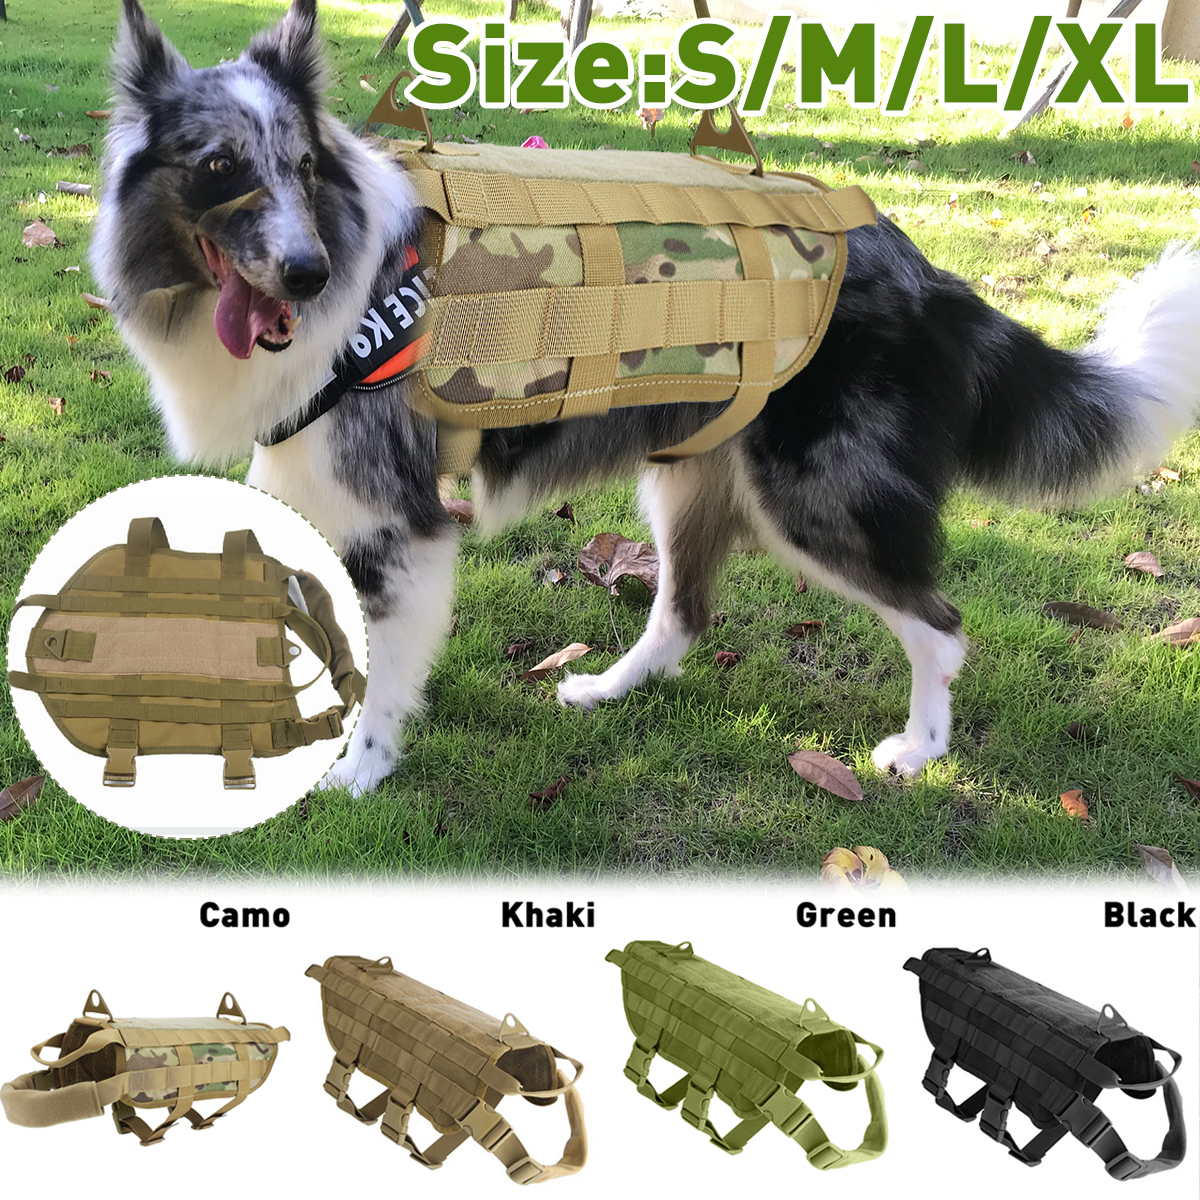 Dog-Vest-Training-Tactical-Army-Dog-Tape-Military-Dog-Clothes-Load-Bearing-Harness-Outdoor-Training--1817000-1